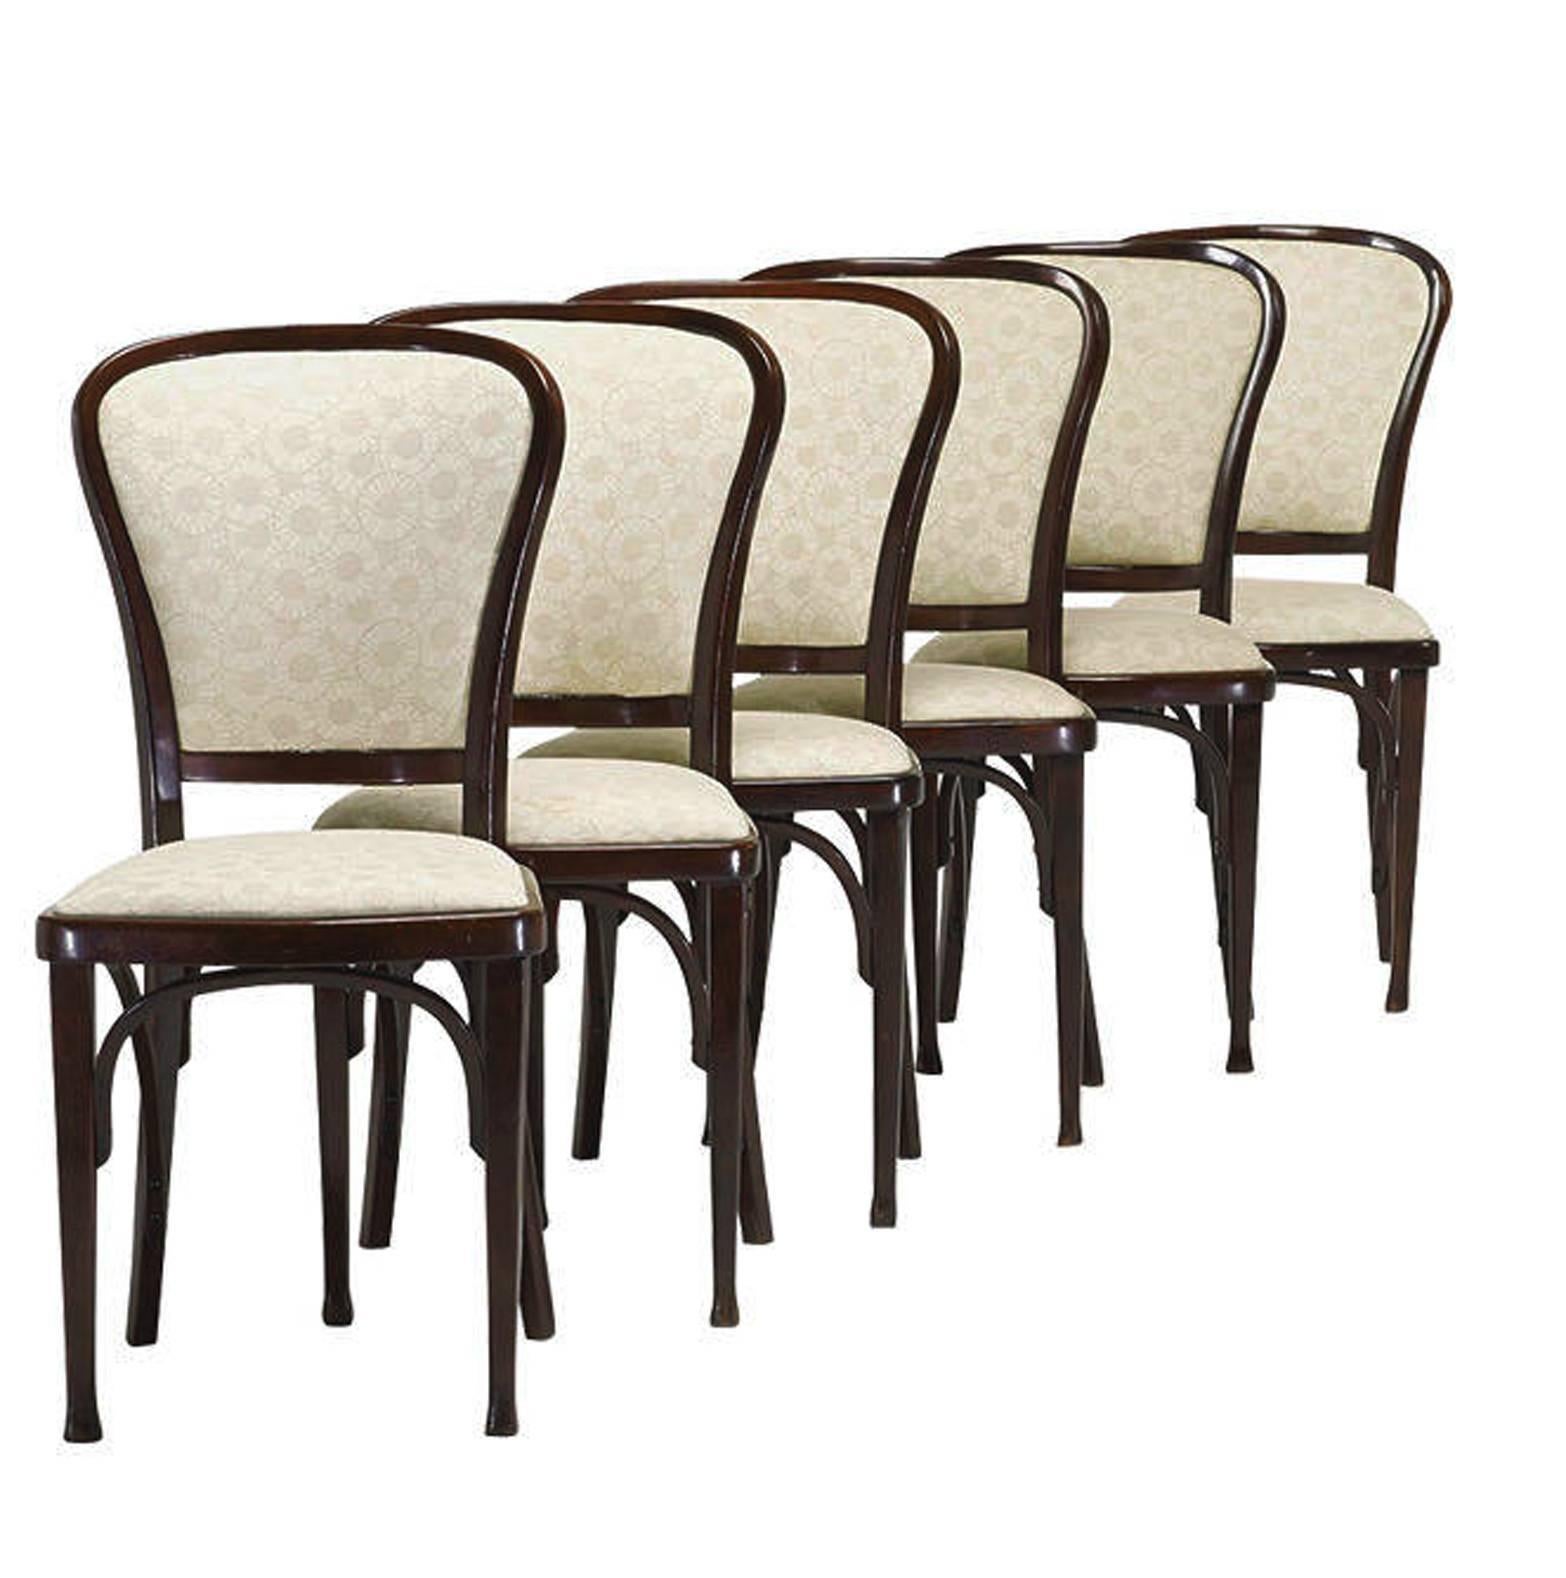 Set of six dining chairs by Gustav Siegel for Thonet from circa 1905s.
Fully restored and covered with Backhausen fabric.
One already restored delivery time for the rest about 4-5 weeks.
 